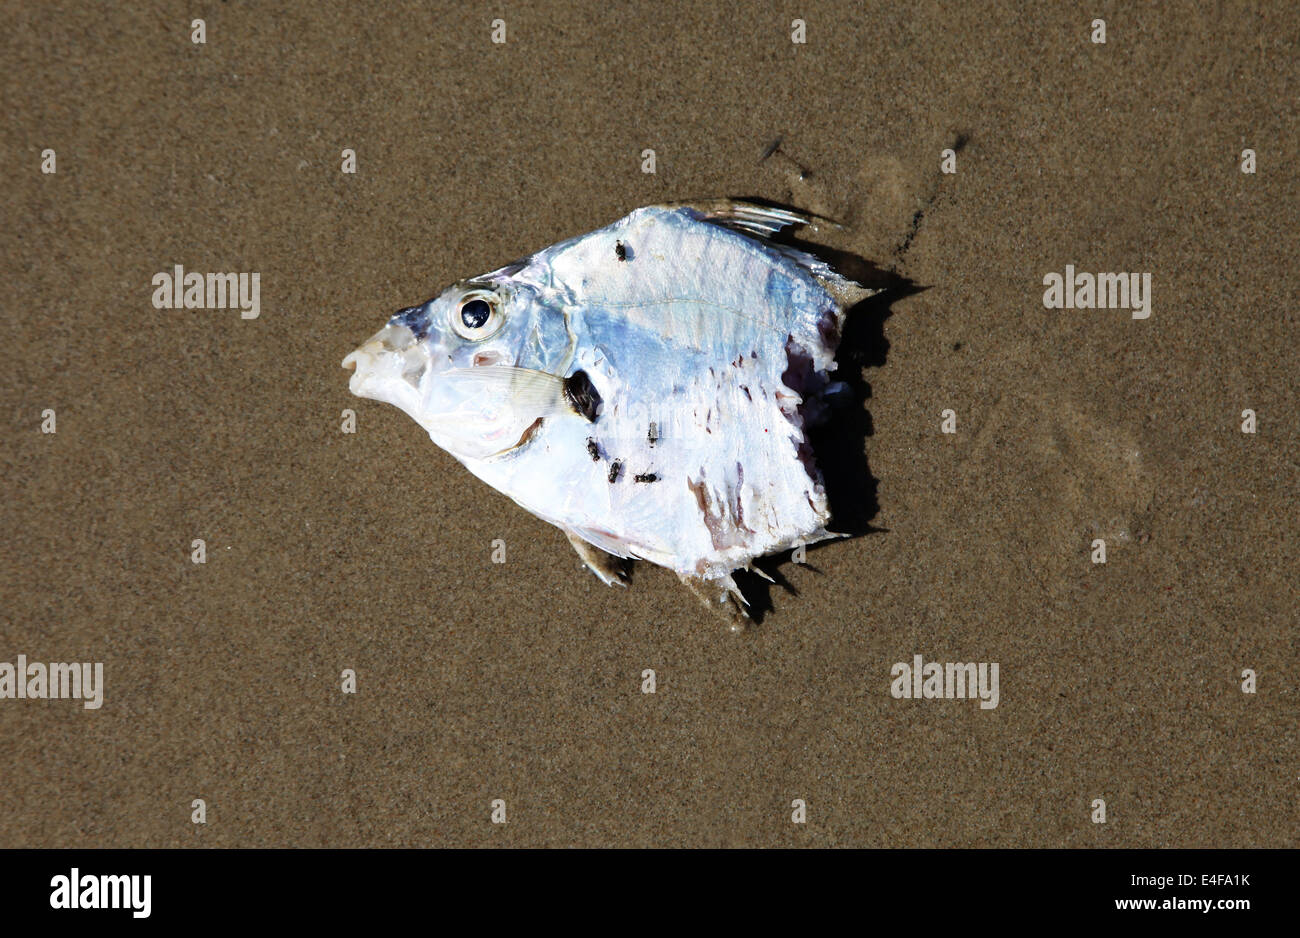 It's a photo of the head of a dead fish on the sand. he is cut in half. View from the top ort top view Stock Photo